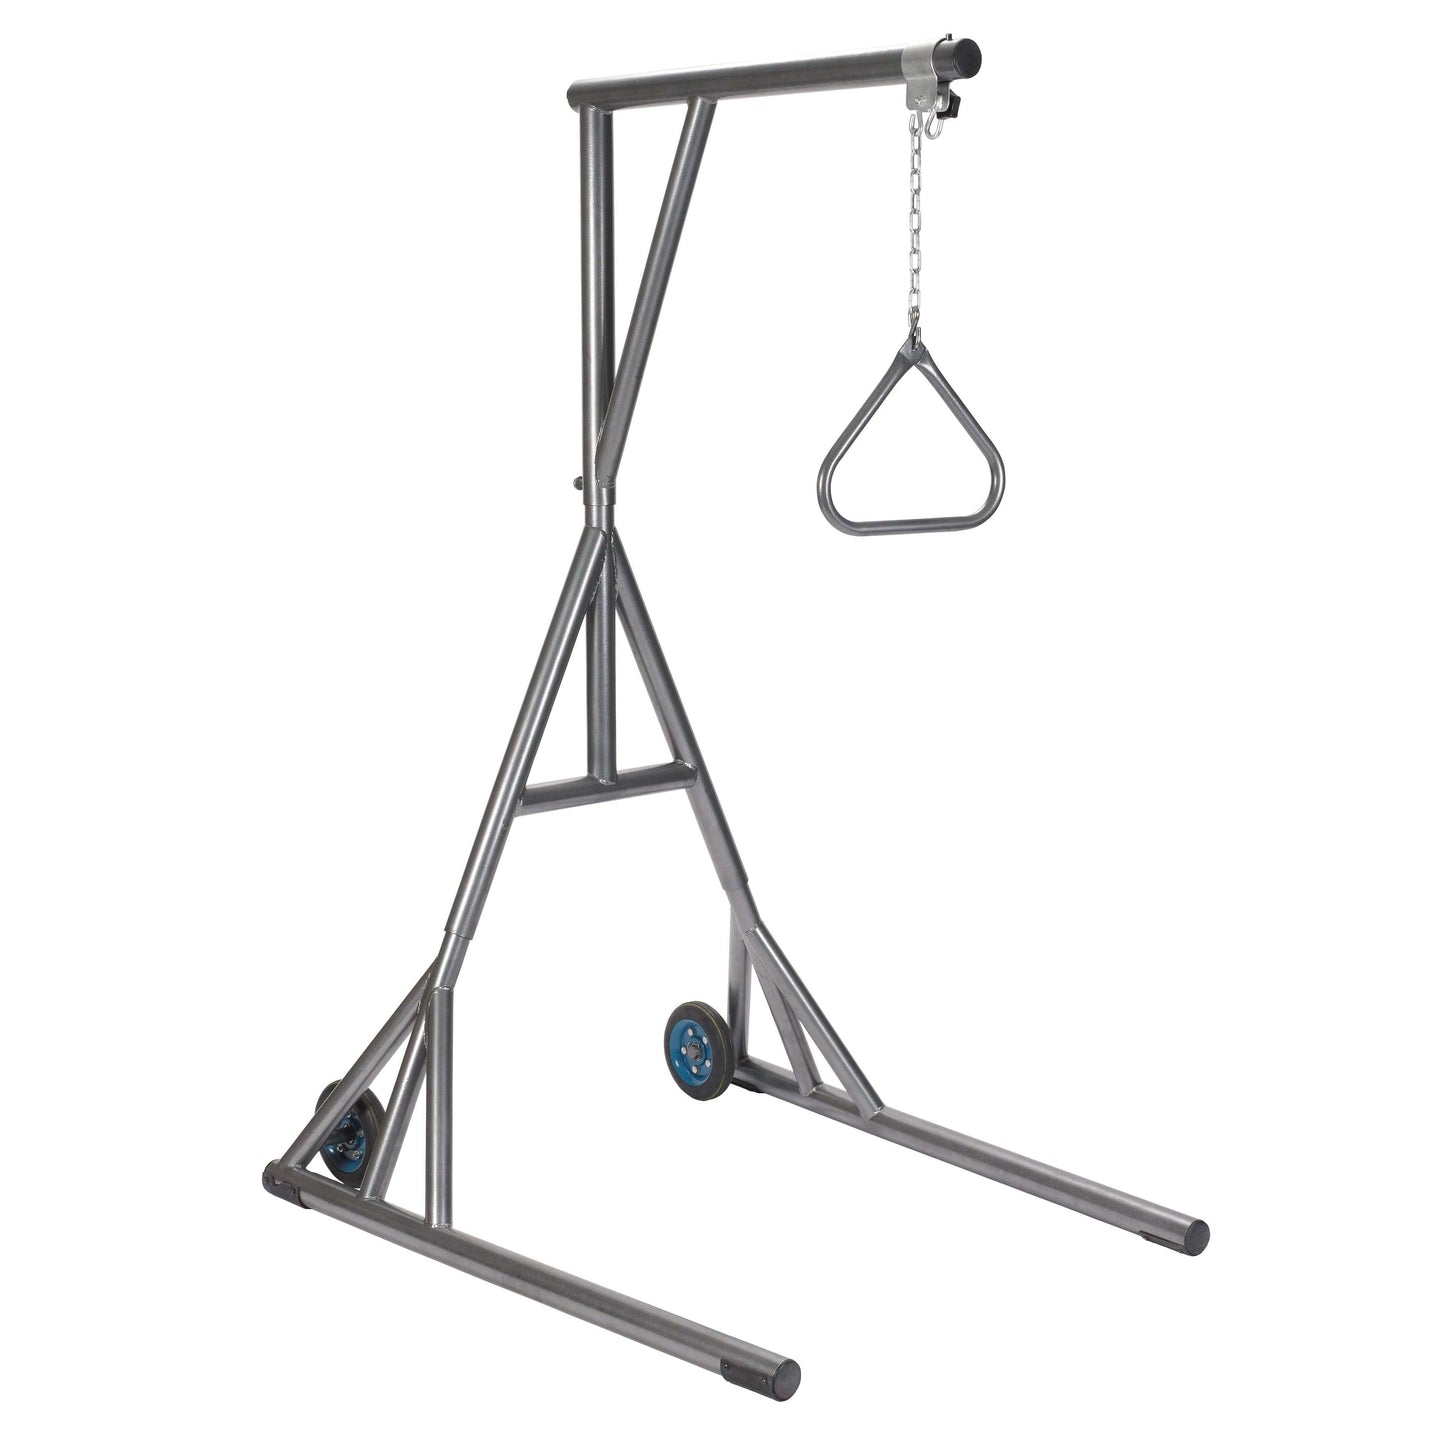 Drive 13039sv Heavy Duty Trapeze with Base and Wheels, Silver Vein